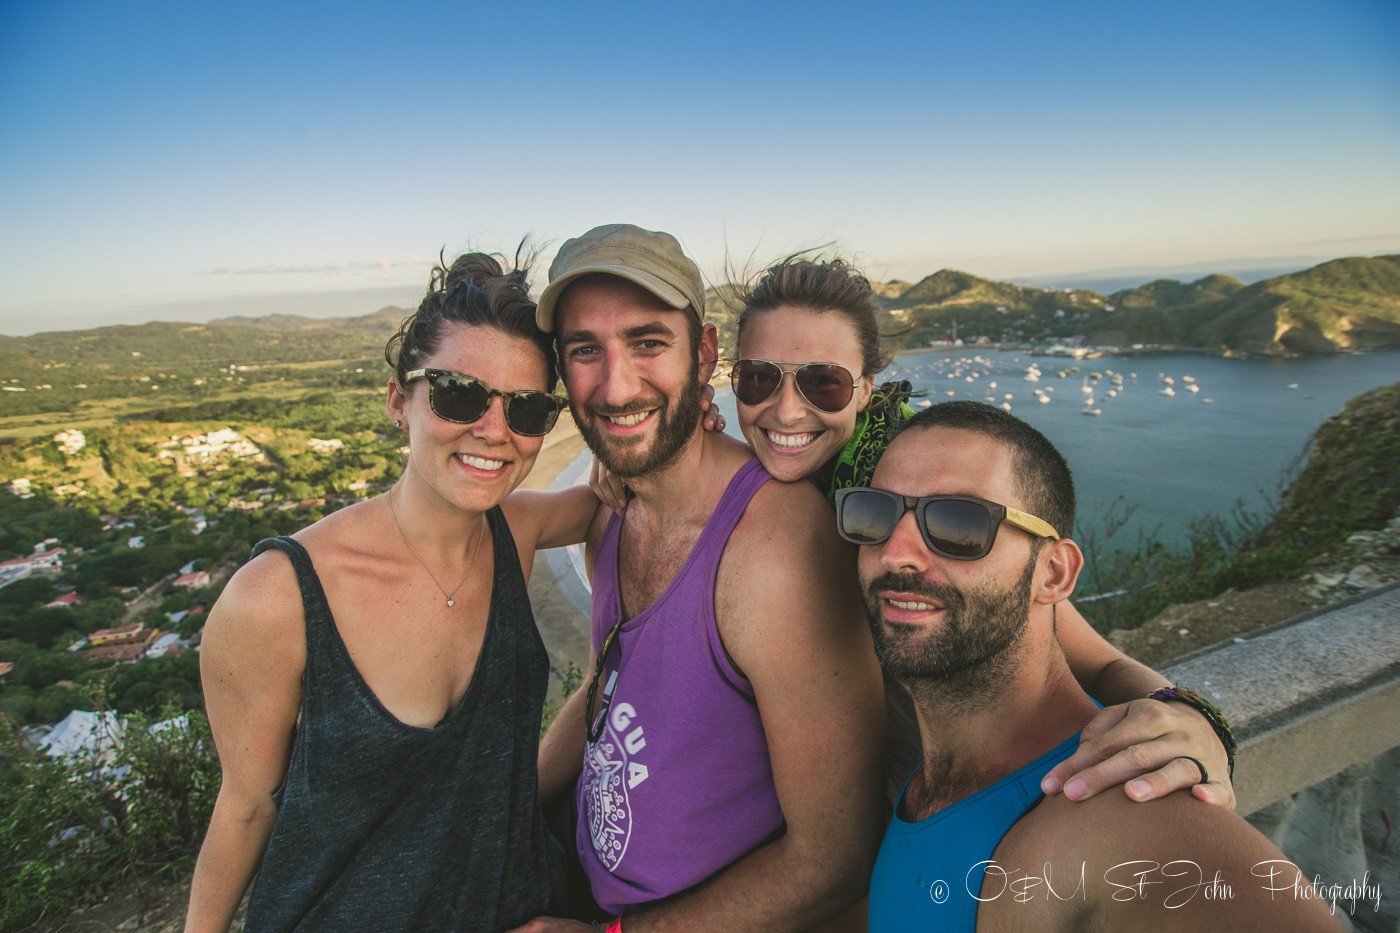 Max, Oksana and friends at the top of Christ of Mercy Statue. San Juan del Sur. Nicaragua